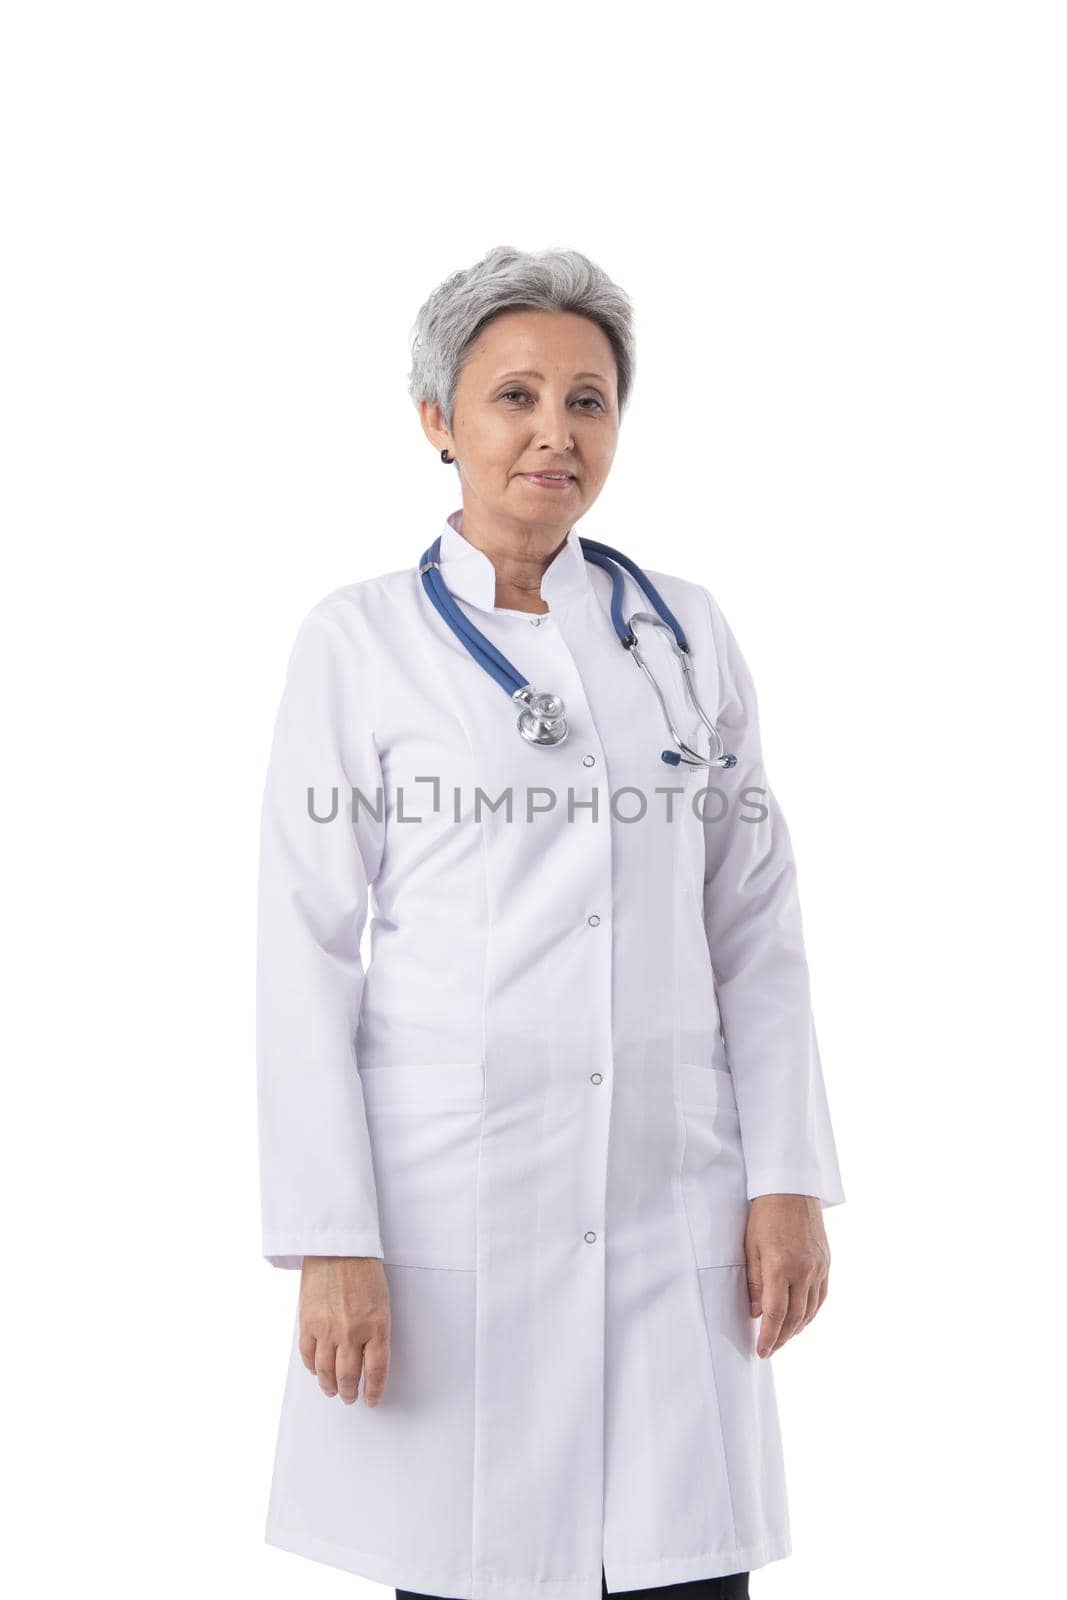 Mature female asian doctor studio portrait isolated over white background